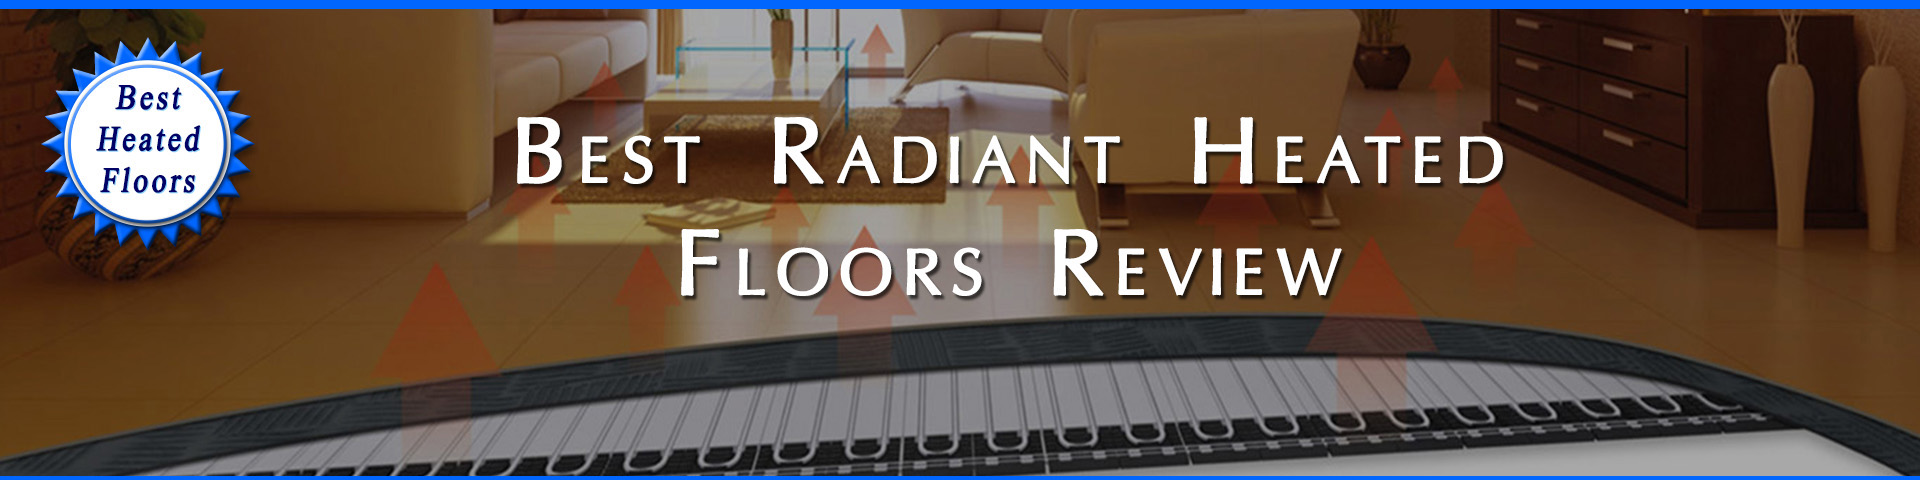 Best heated floor systems banner.